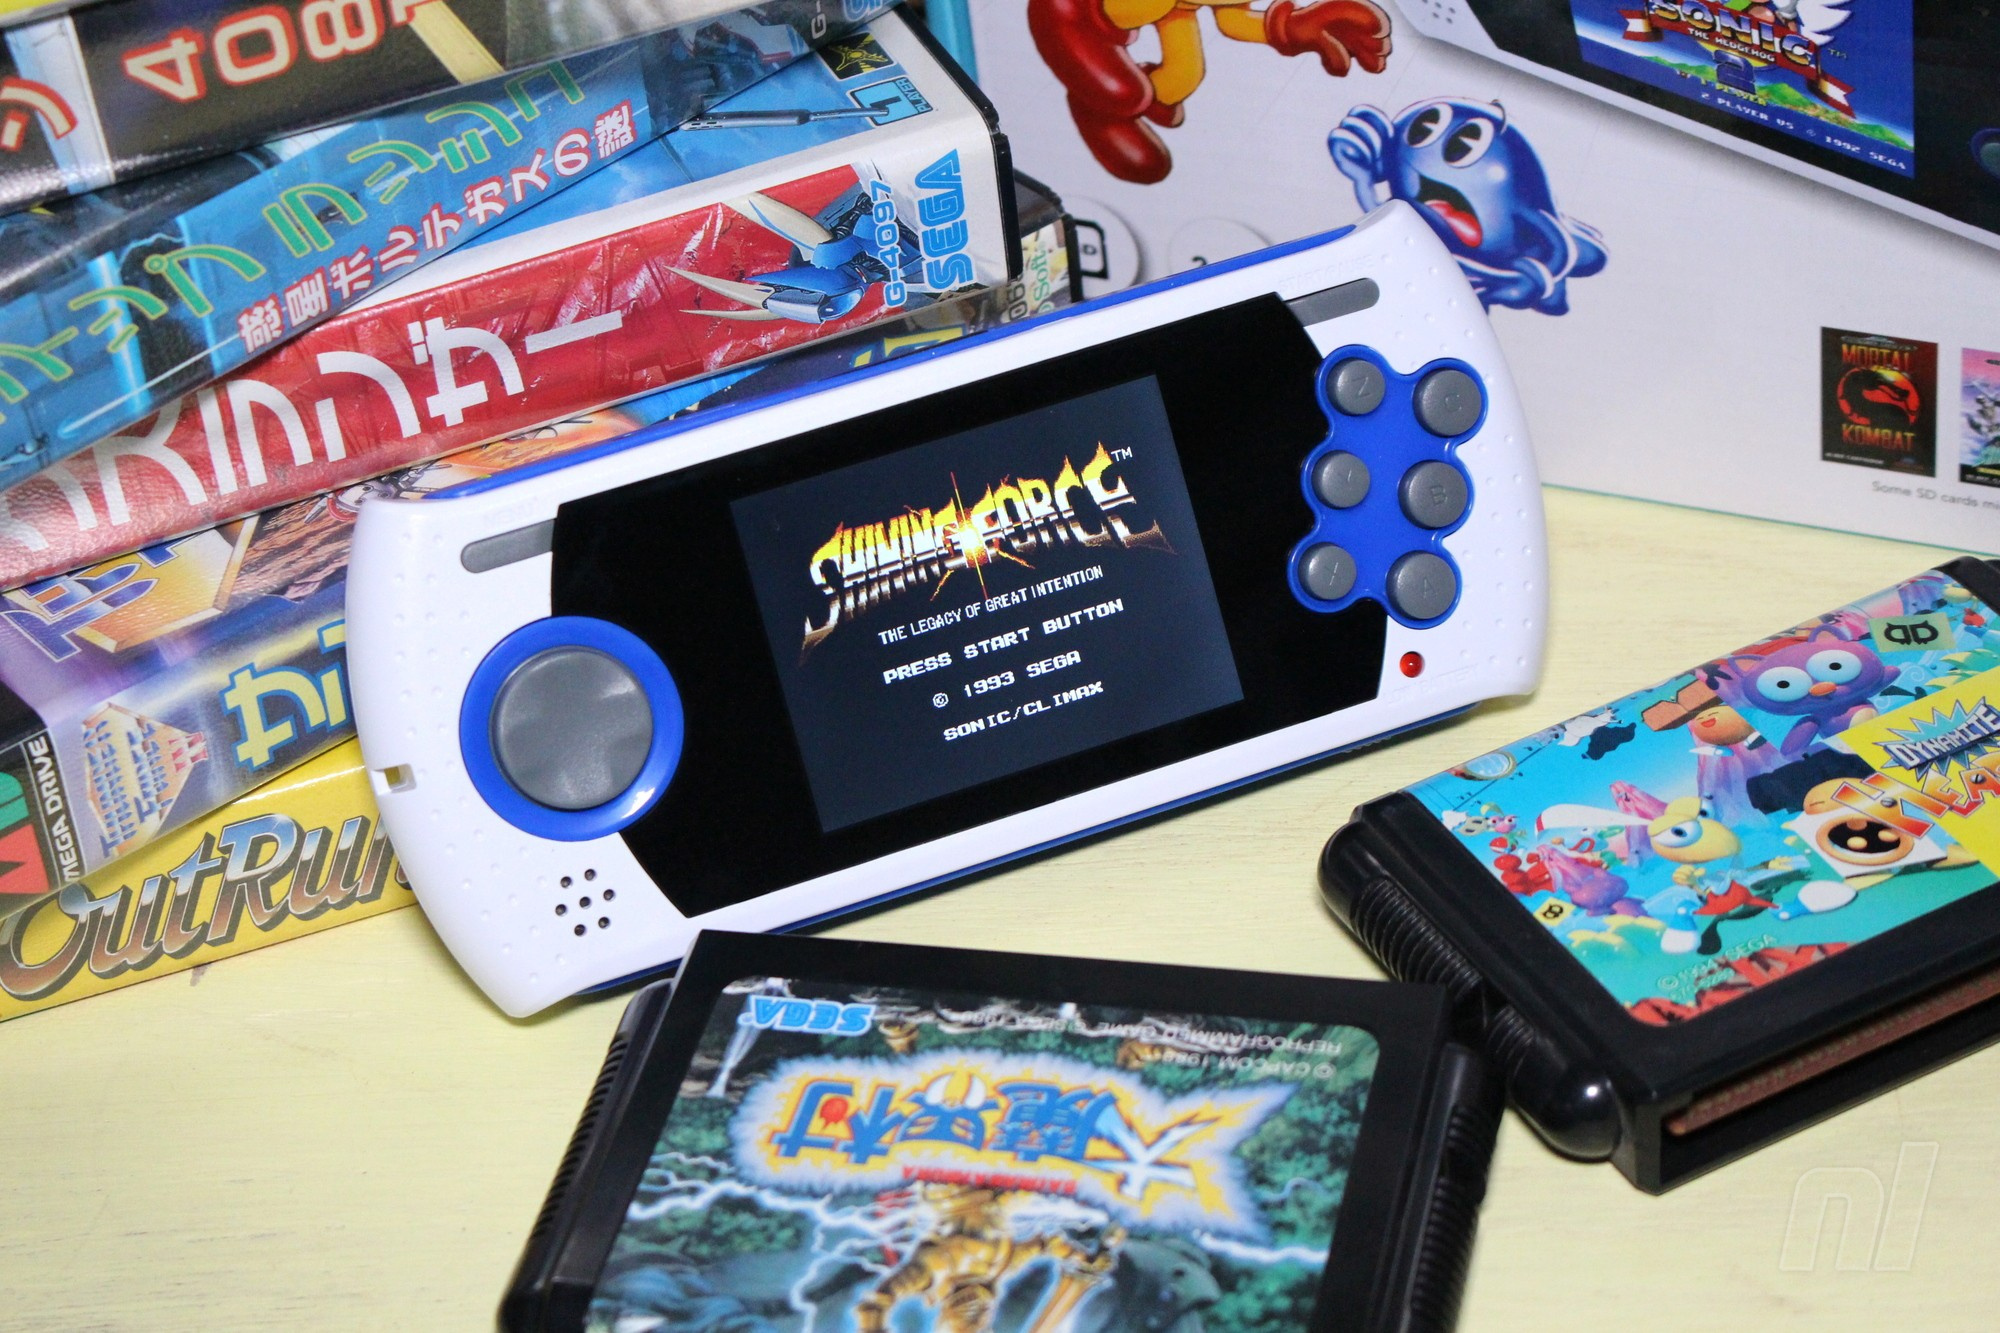 sega ultimate portable game player console with 85 games